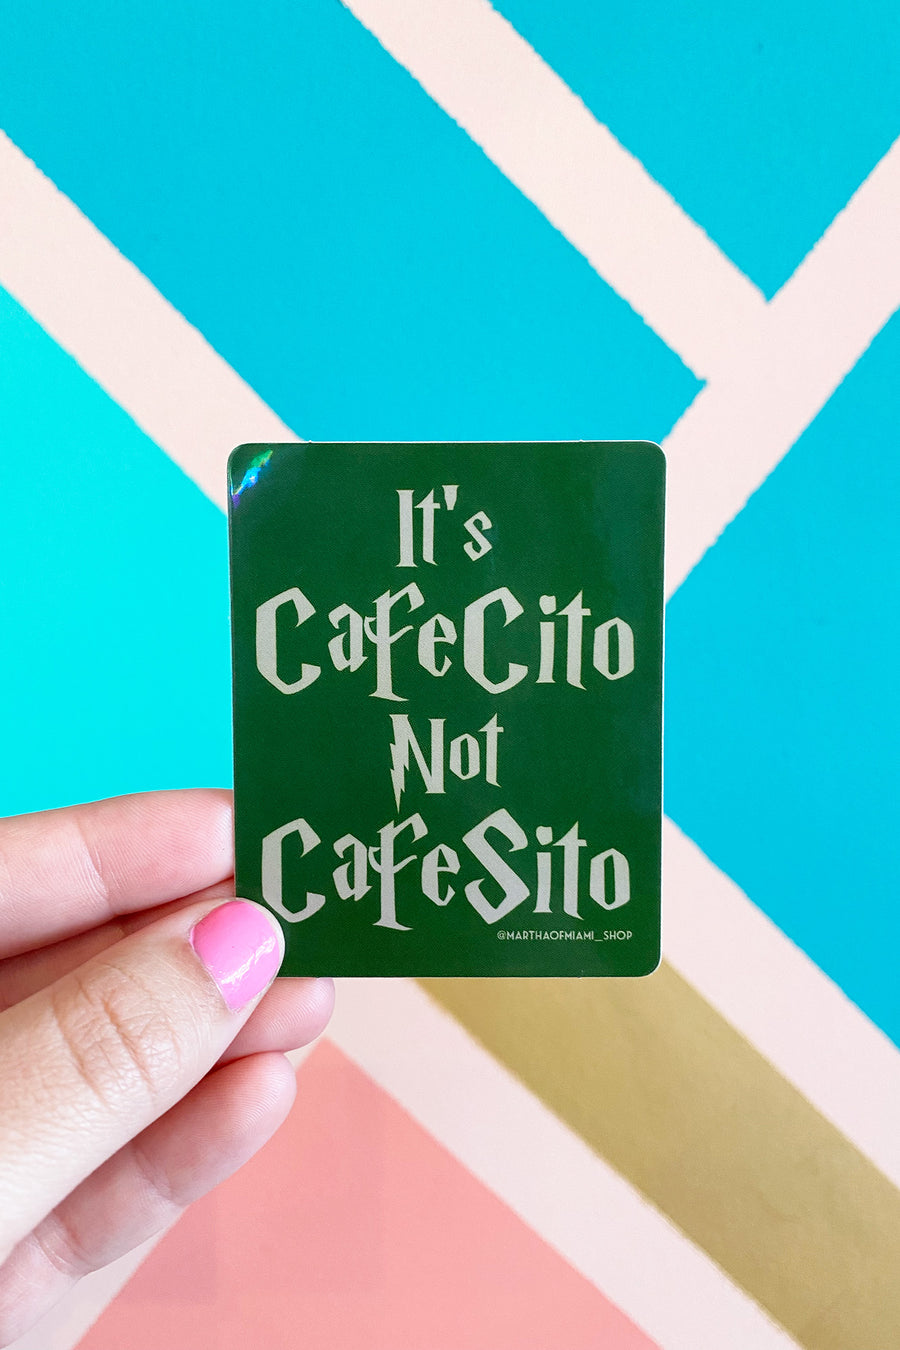 "It's Cafecito, Not Cafesito!" Pronunciation is important when it comes to this famous caffeinate spell!